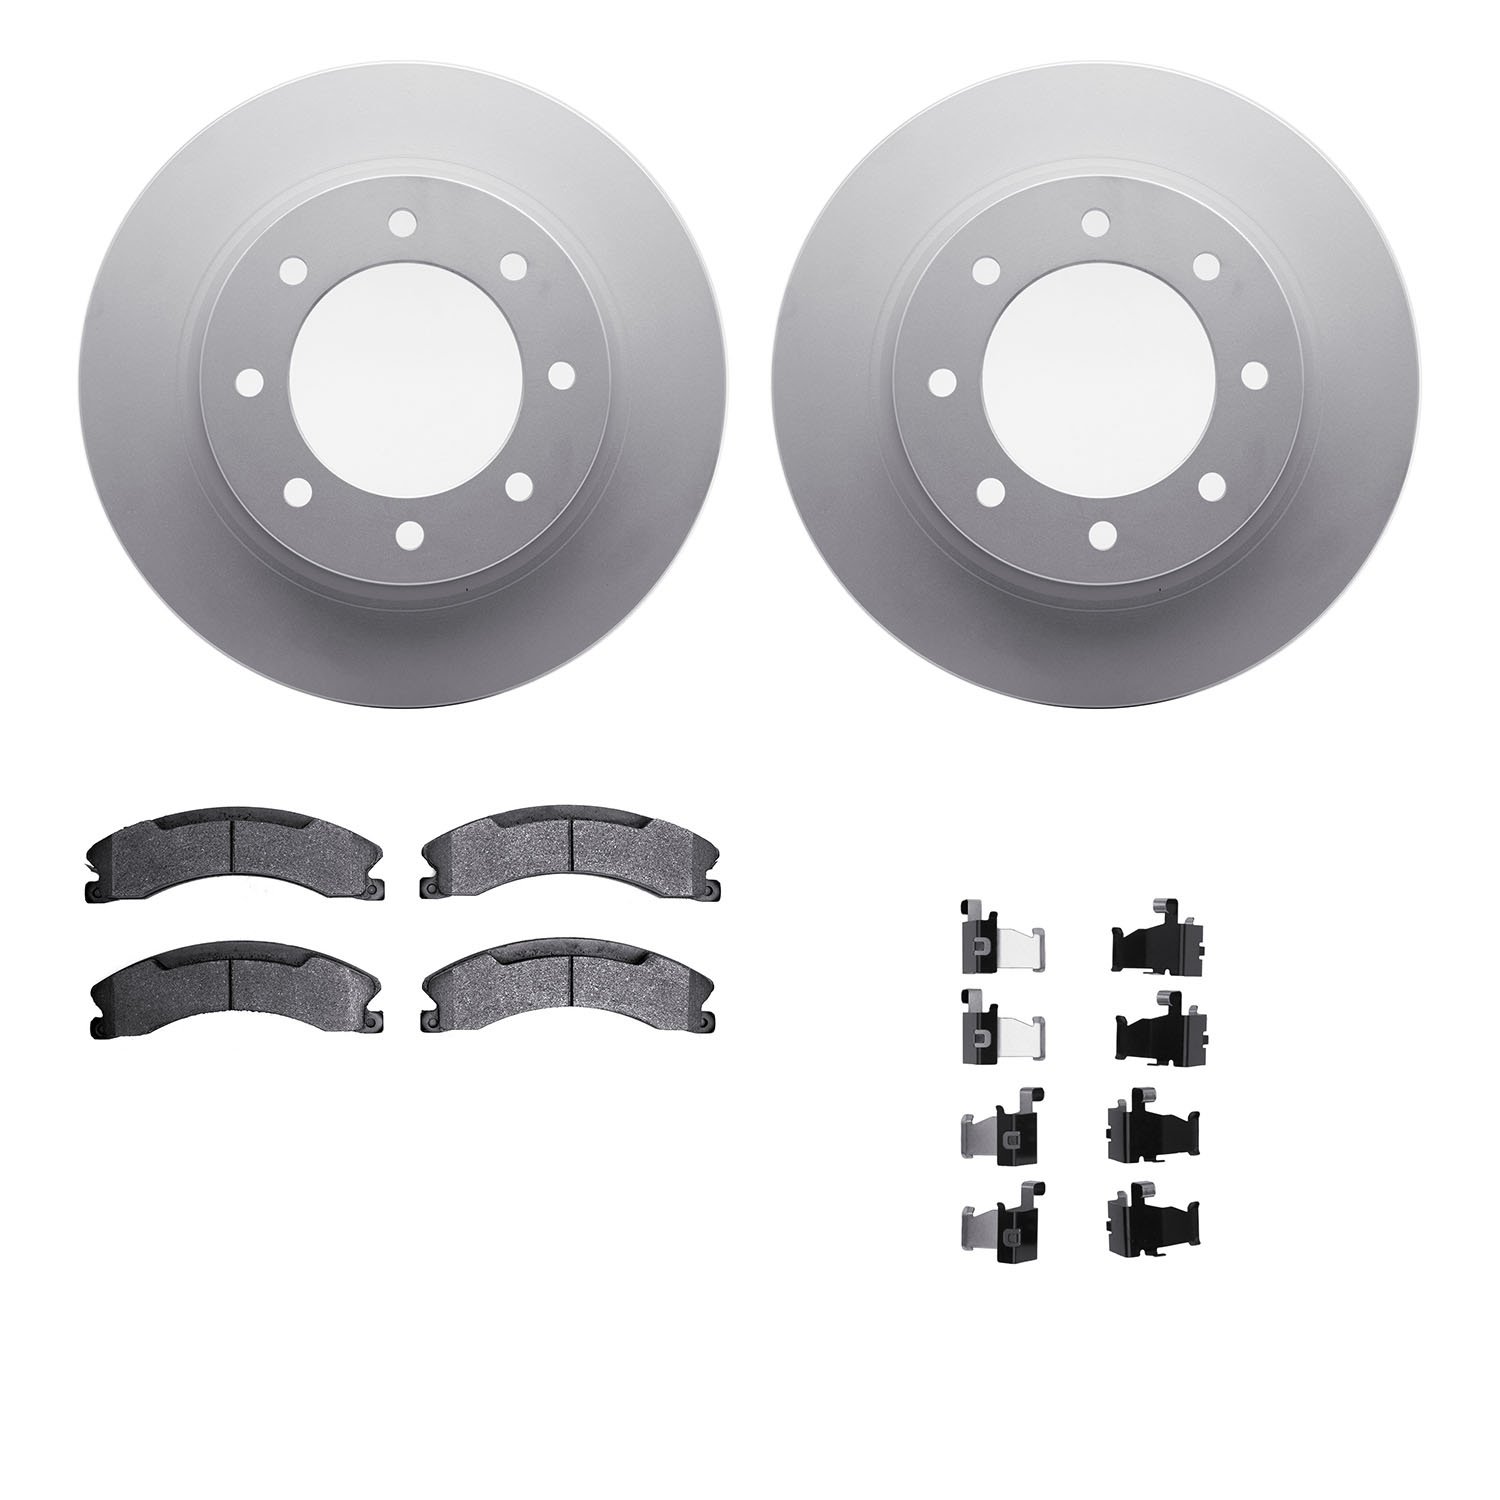 4412-67007 Geospec Brake Rotors with Ultimate-Duty Brake Pads & Hardware, 2012-2021 Infiniti/Nissan, Position: Front